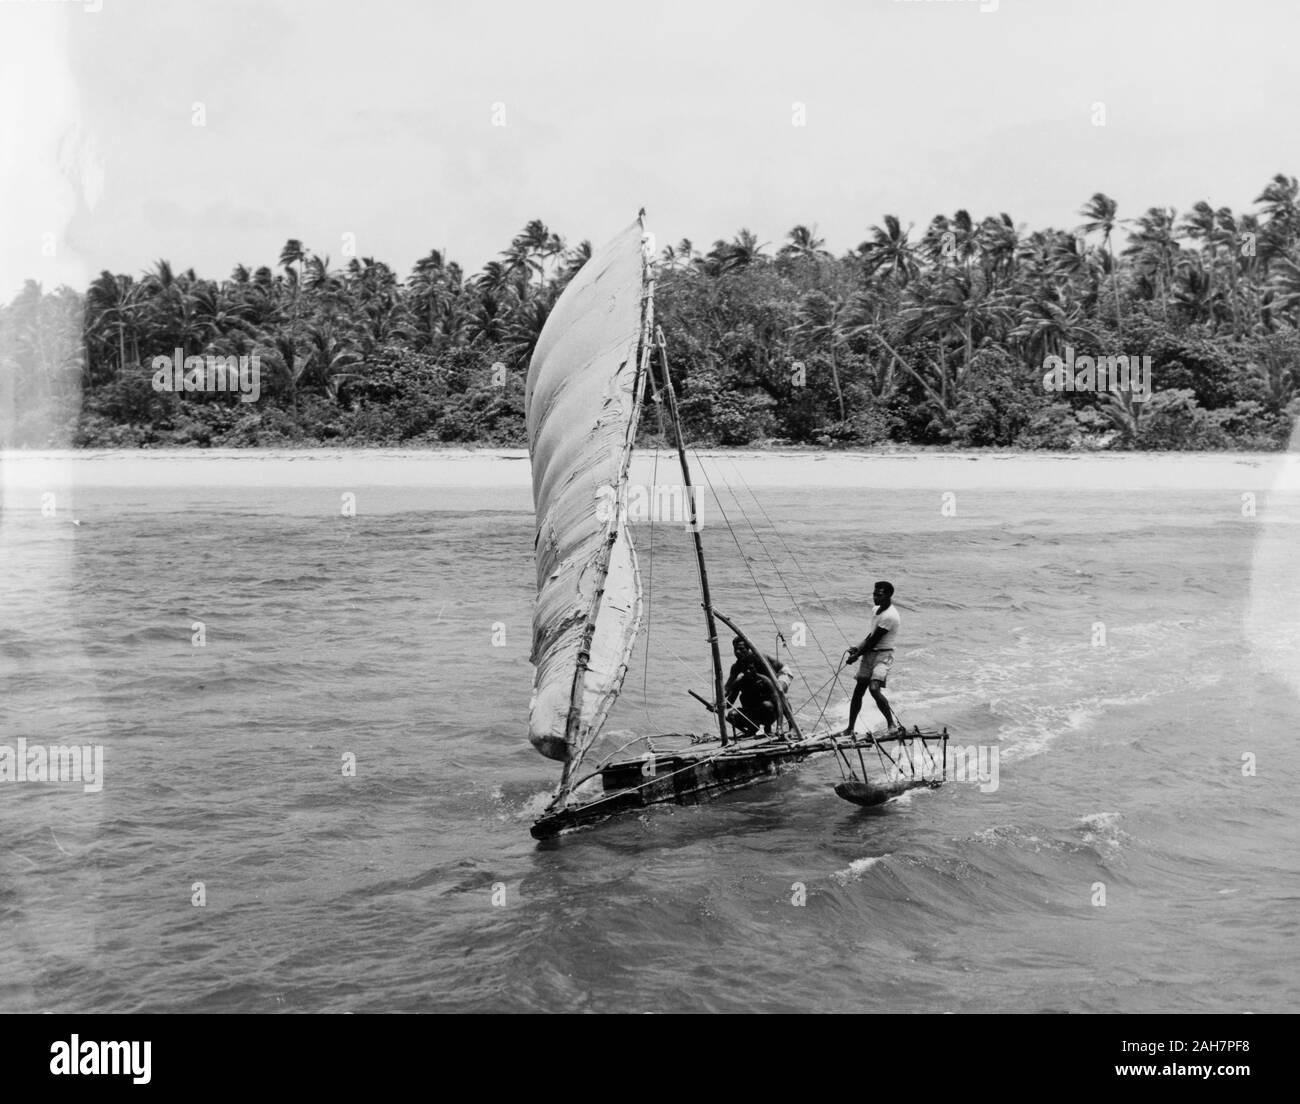 Fiji, Manning a Fijian 'drua'. A 'drua' (Fijian catamaran) scuds across the waves away from a beach flanked by palm forest. Caption reads: Although this an ordinary sailing canoe, the Fijians used to build great 'Drua', catamarans which were capable of carrying more than two hundred men and cargoes, 1965. 2005/010/1/14/18. Stock Photo